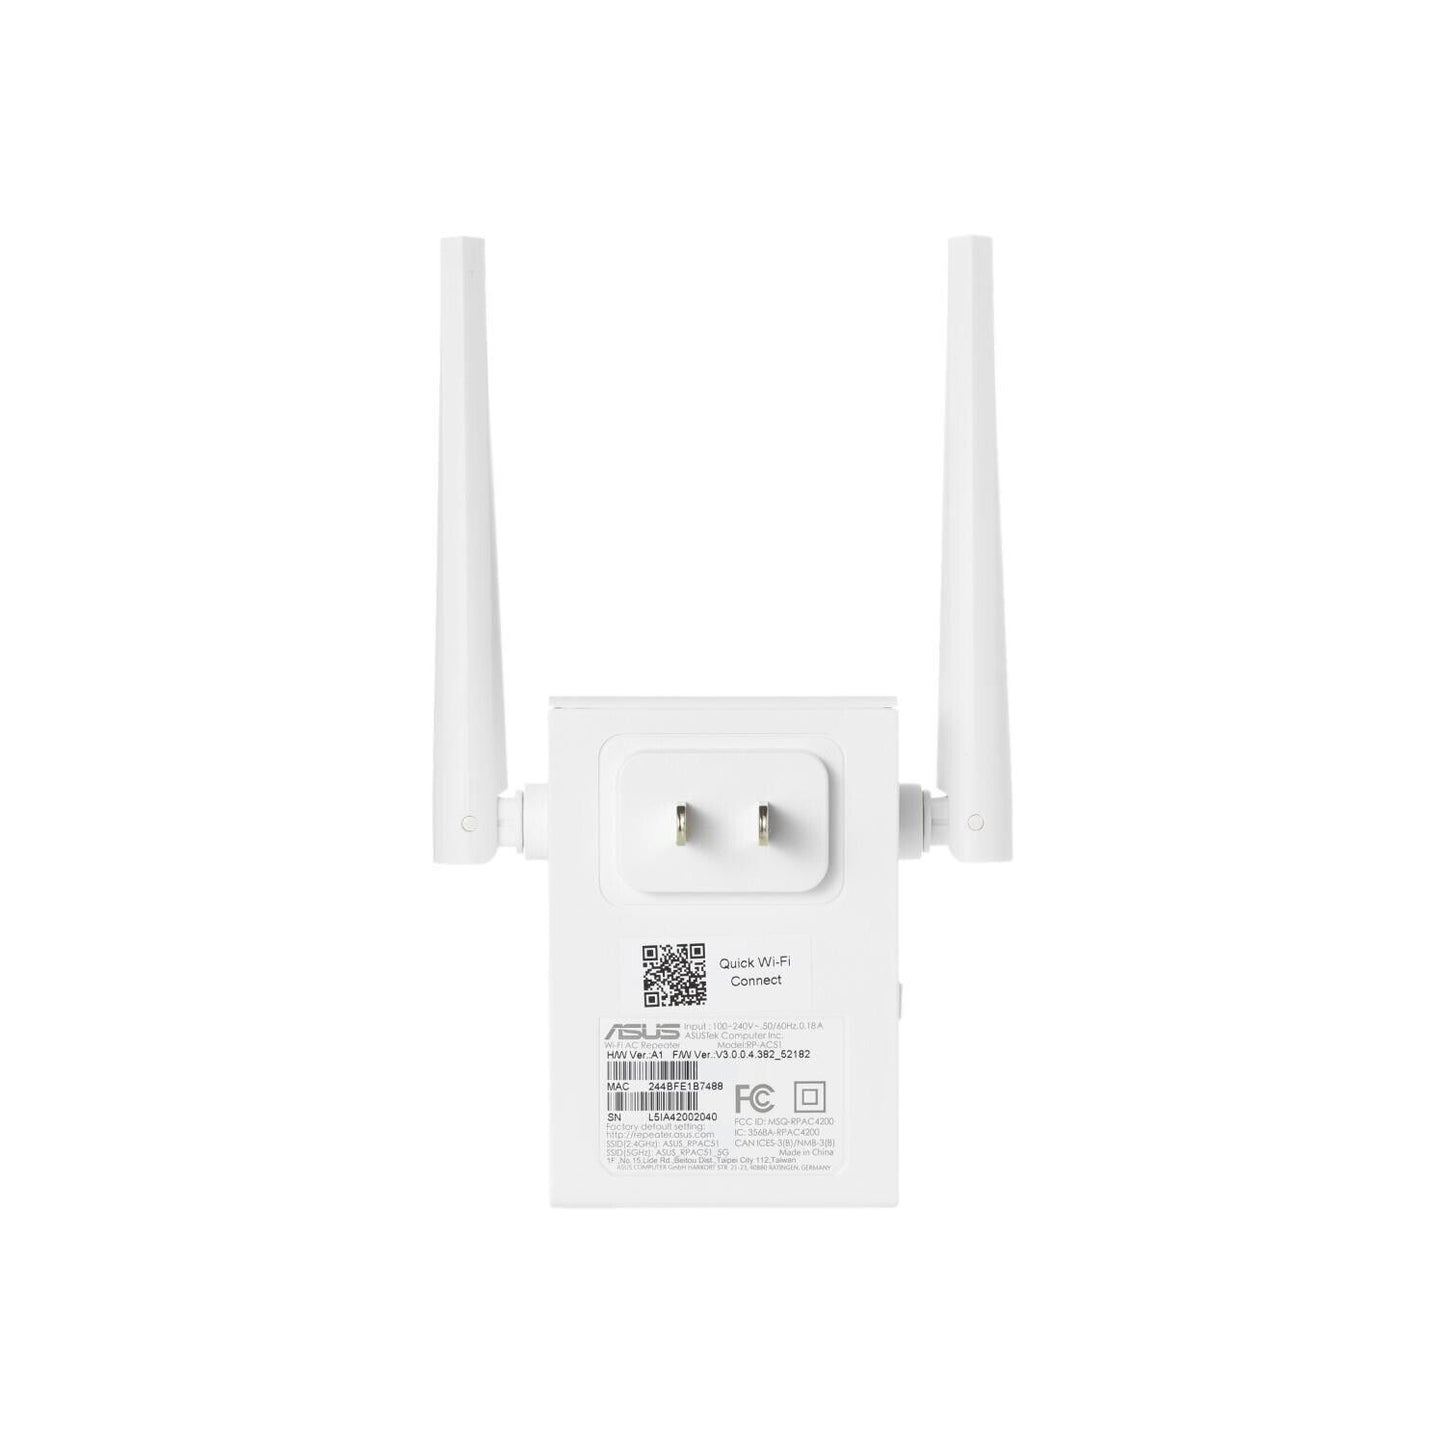 Asus RP-AC51 Dual Band Wireless WiFi Repeater Signal Booster Range Extender OEM